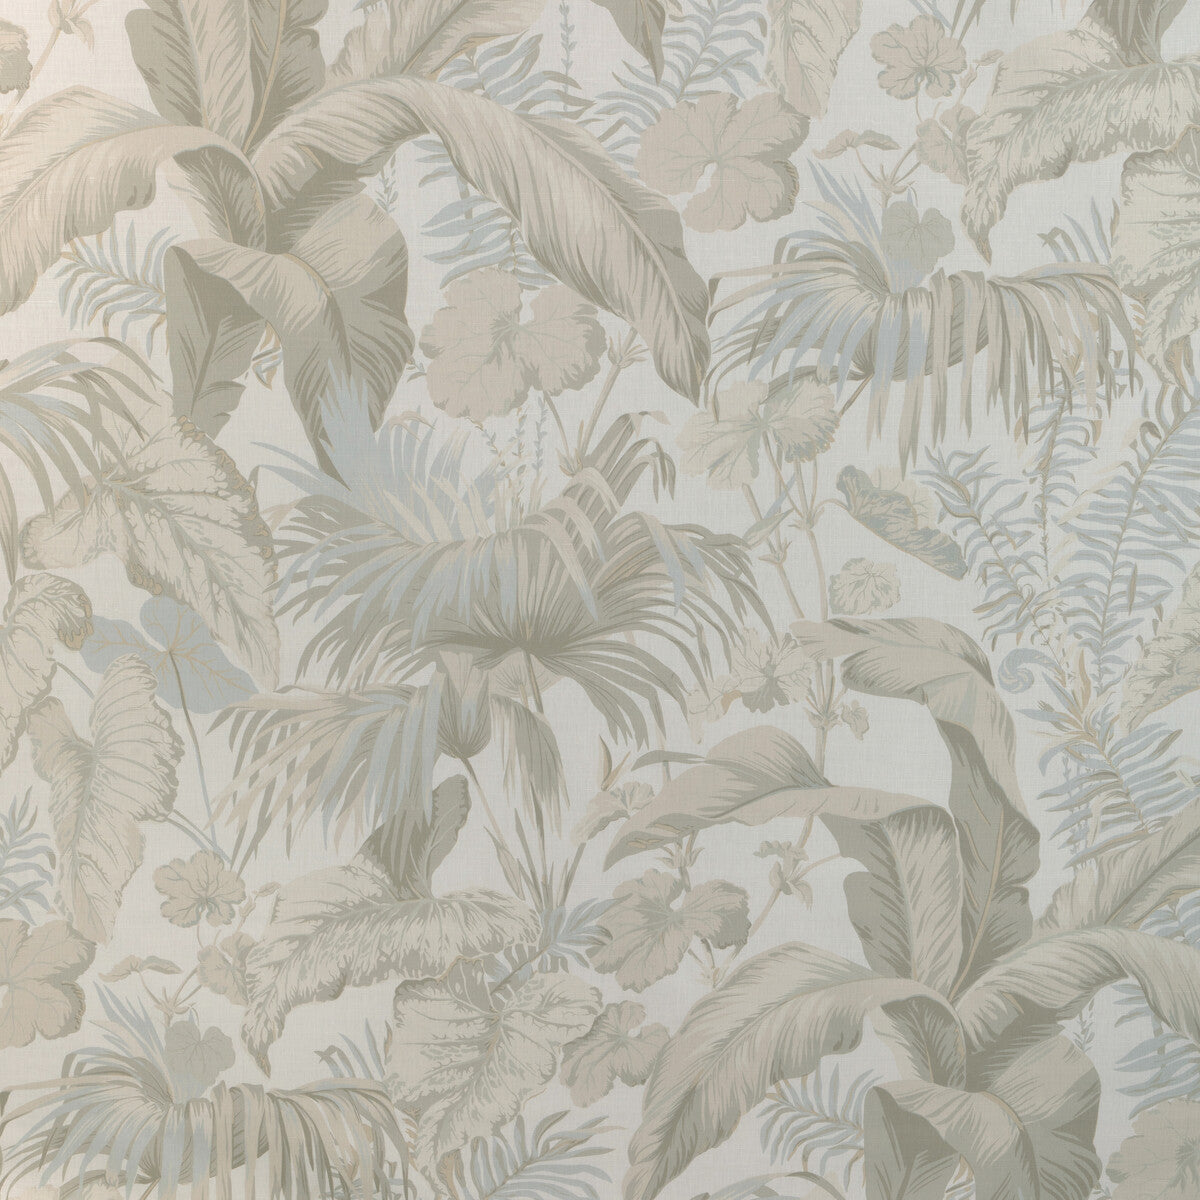 Yasuni fabric in sepia color - pattern YASUNI.106.0 - by Kravet Couture in the Casa Botanica collection